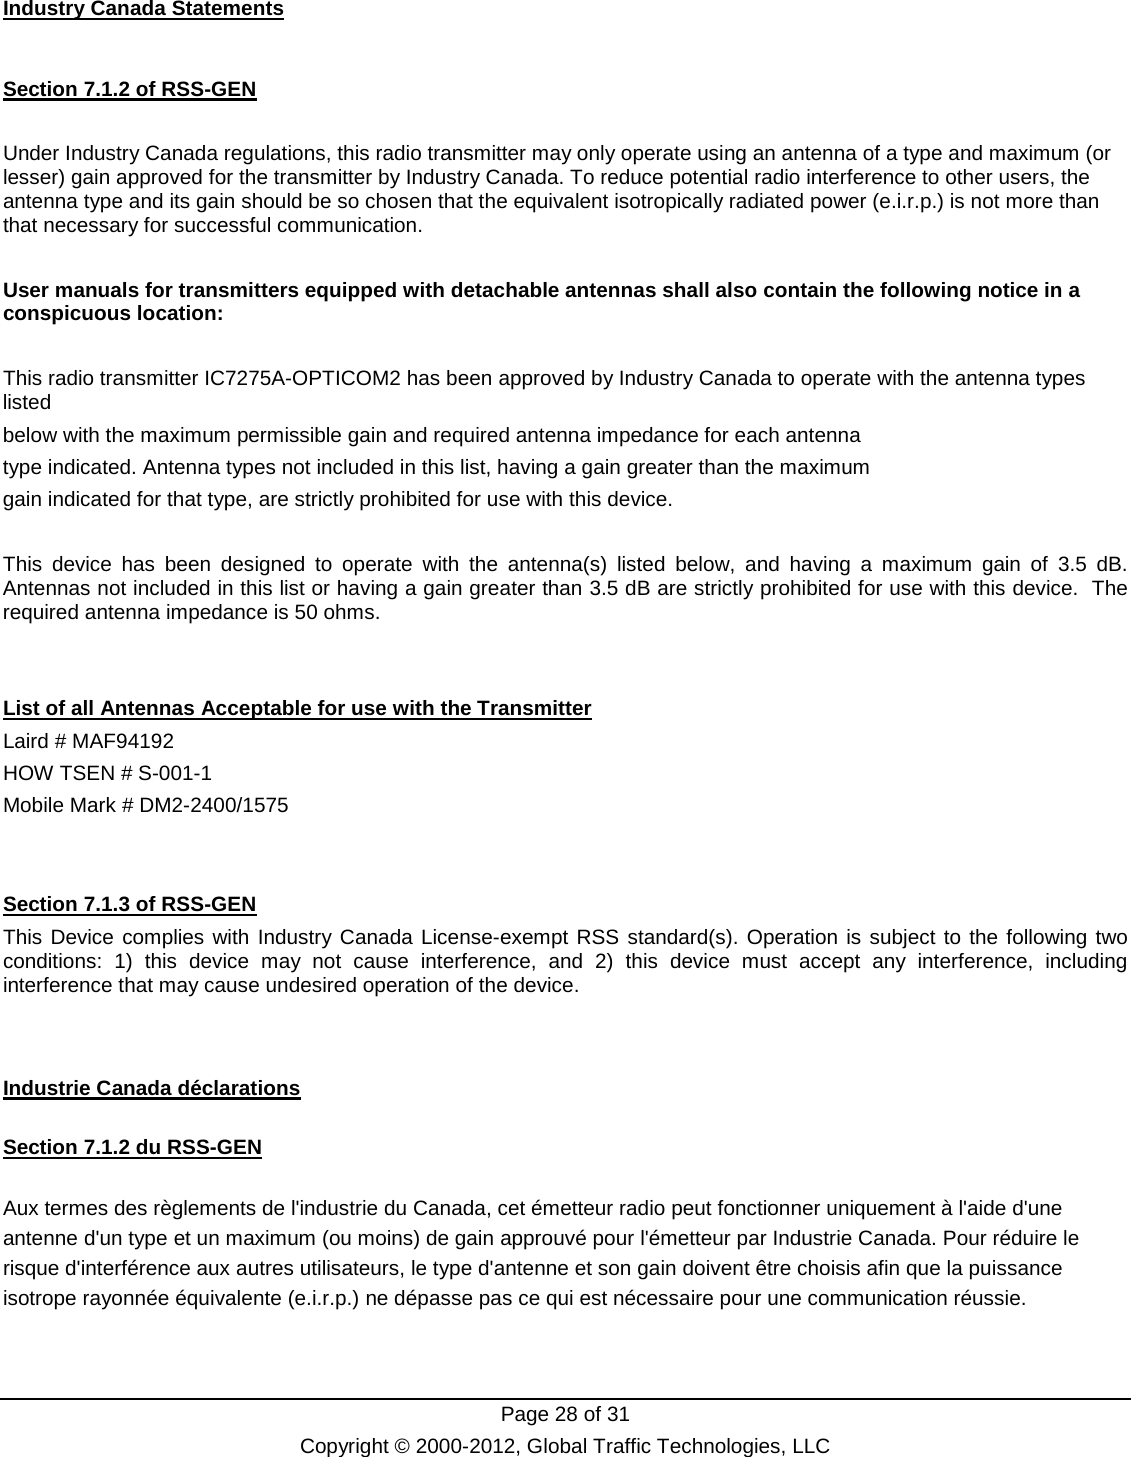  Page 28 of 31 Copyright © 2000-2012, Global Traffic Technologies, LLC Industry Canada Statements  Section 7.1.2 of RSS-GEN  Under Industry Canada regulations, this radio transmitter may only operate using an antenna of a type and maximum (or lesser) gain approved for the transmitter by Industry Canada. To reduce potential radio interference to other users, the antenna type and its gain should be so chosen that the equivalent isotropically radiated power (e.i.r.p.) is not more than that necessary for successful communication.  User manuals for transmitters equipped with detachable antennas shall also contain the following notice in a conspicuous location:  This radio transmitter IC7275A-OPTICOM2 has been approved by Industry Canada to operate with the antenna types listed below with the maximum permissible gain and required antenna impedance for each antenna type indicated. Antenna types not included in this list, having a gain greater than the maximum gain indicated for that type, are strictly prohibited for use with this device.  This device has been designed to operate with the antenna(s) listed below, and having a maximum gain of  3.5 dB.  Antennas not included in this list or having a gain greater than 3.5 dB are strictly prohibited for use with this device.  The required antenna impedance is 50 ohms.   List of all Antennas Acceptable for use with the Transmitter Laird # MAF94192 HOW TSEN # S-001-1 Mobile Mark # DM2-2400/1575    Section 7.1.3 of RSS-GEN This Device complies with Industry Canada License-exempt RSS standard(s). Operation is subject to the following two conditions: 1) this device may not cause interference, and 2) this device must accept any interference, including interference that may cause undesired operation of the device.   Industrie Canada déclarations  Section 7.1.2 du RSS-GEN  Aux termes des règlements de l&apos;industrie du Canada, cet émetteur radio peut fonctionner uniquement à l&apos;aide d&apos;une antenne d&apos;un type et un maximum (ou moins) de gain approuvé pour l&apos;émetteur par Industrie Canada. Pour réduire le risque d&apos;interférence aux autres utilisateurs, le type d&apos;antenne et son gain doivent être choisis afin que la puissance isotrope rayonnée équivalente (e.i.r.p.) ne dépasse pas ce qui est nécessaire pour une communication réussie.  